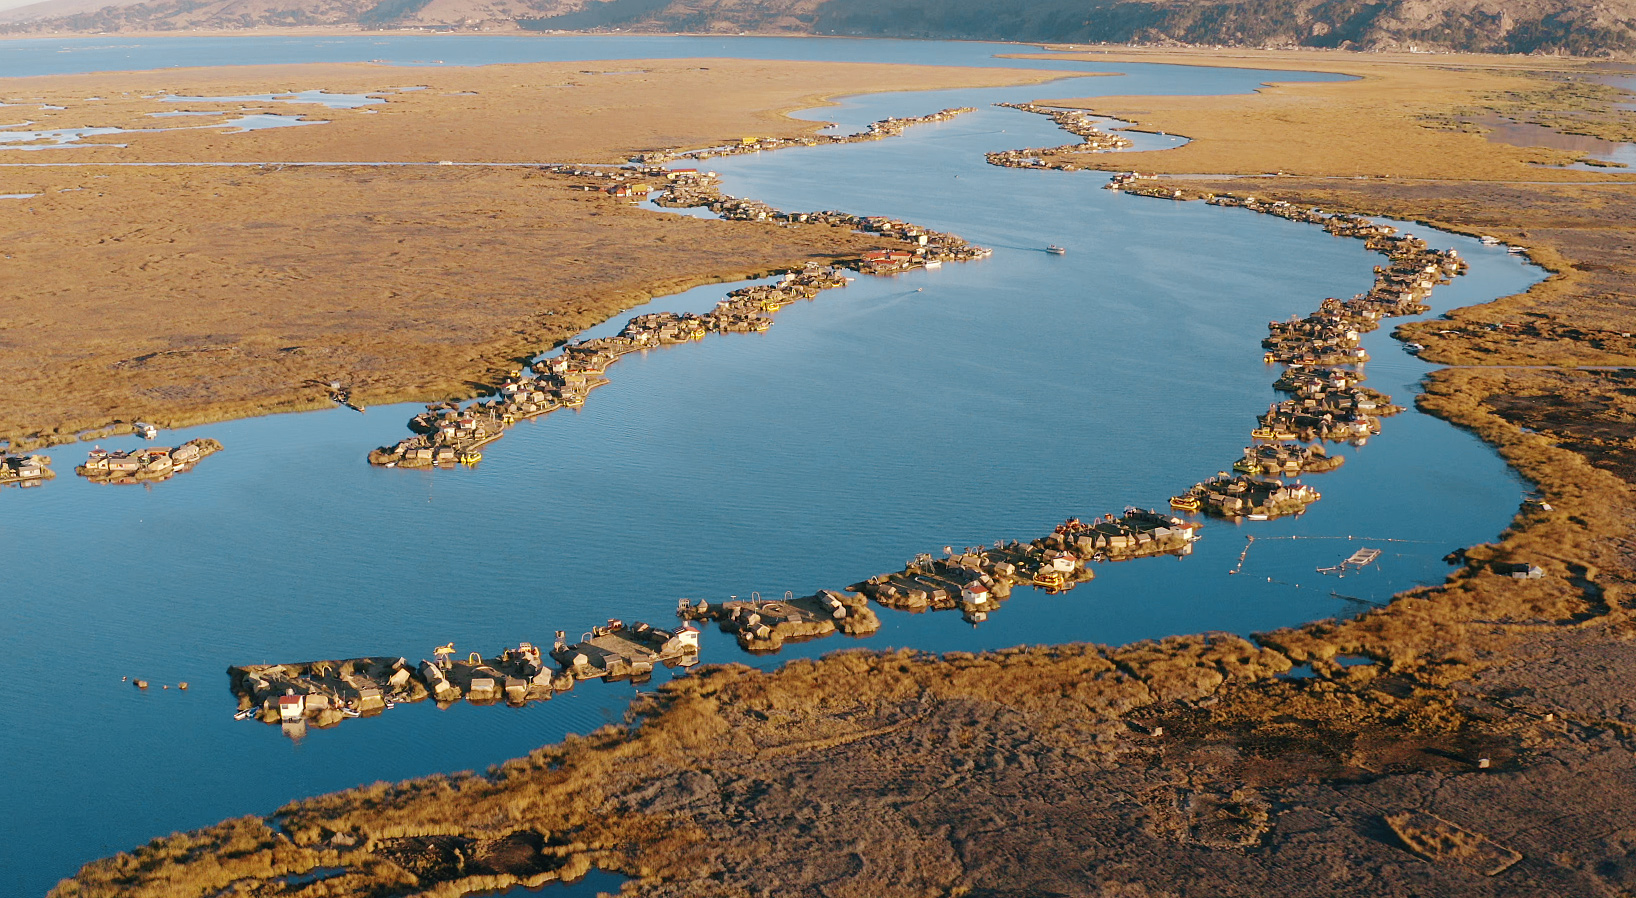 An aerial view of a large body of water dotted with Uros islands.